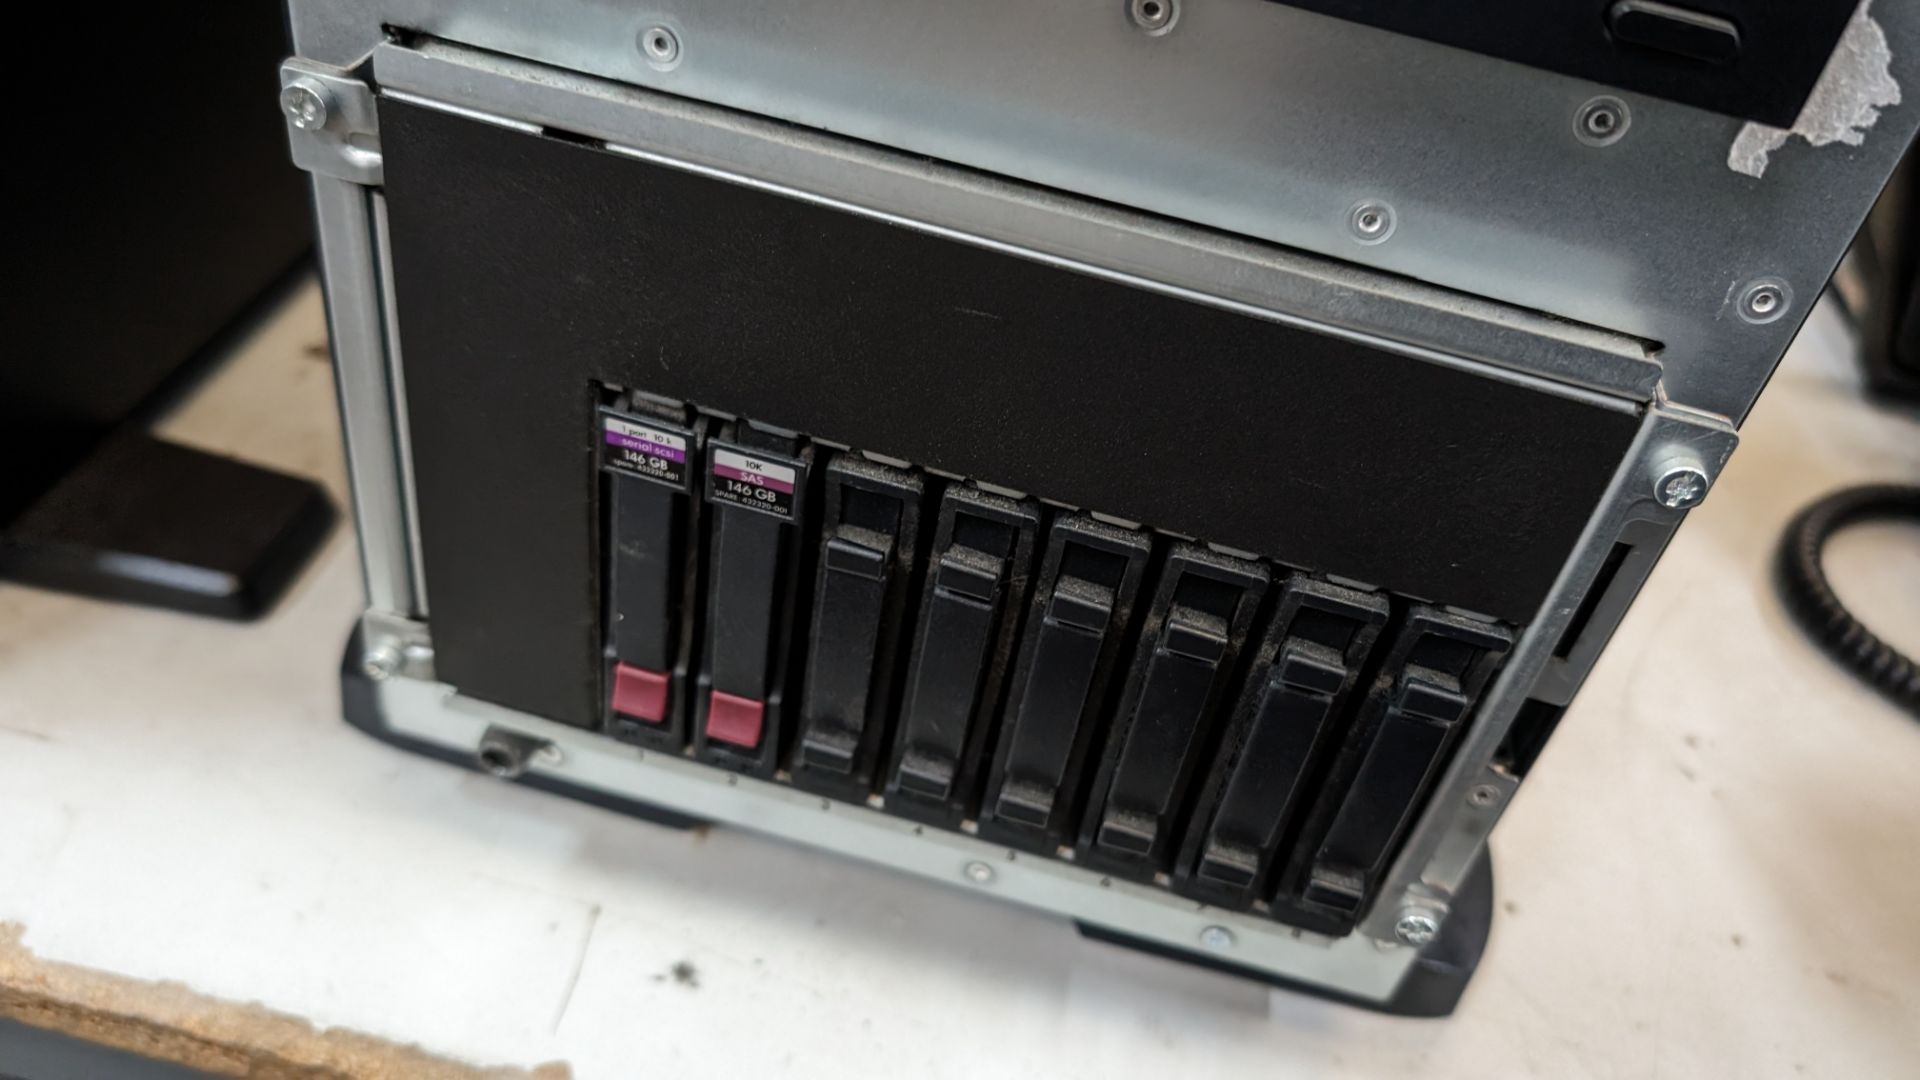 HP server incorporating 2 off hot swap drives, optical drive & HP Storageworks DAT 160 tape drive - Image 7 of 15